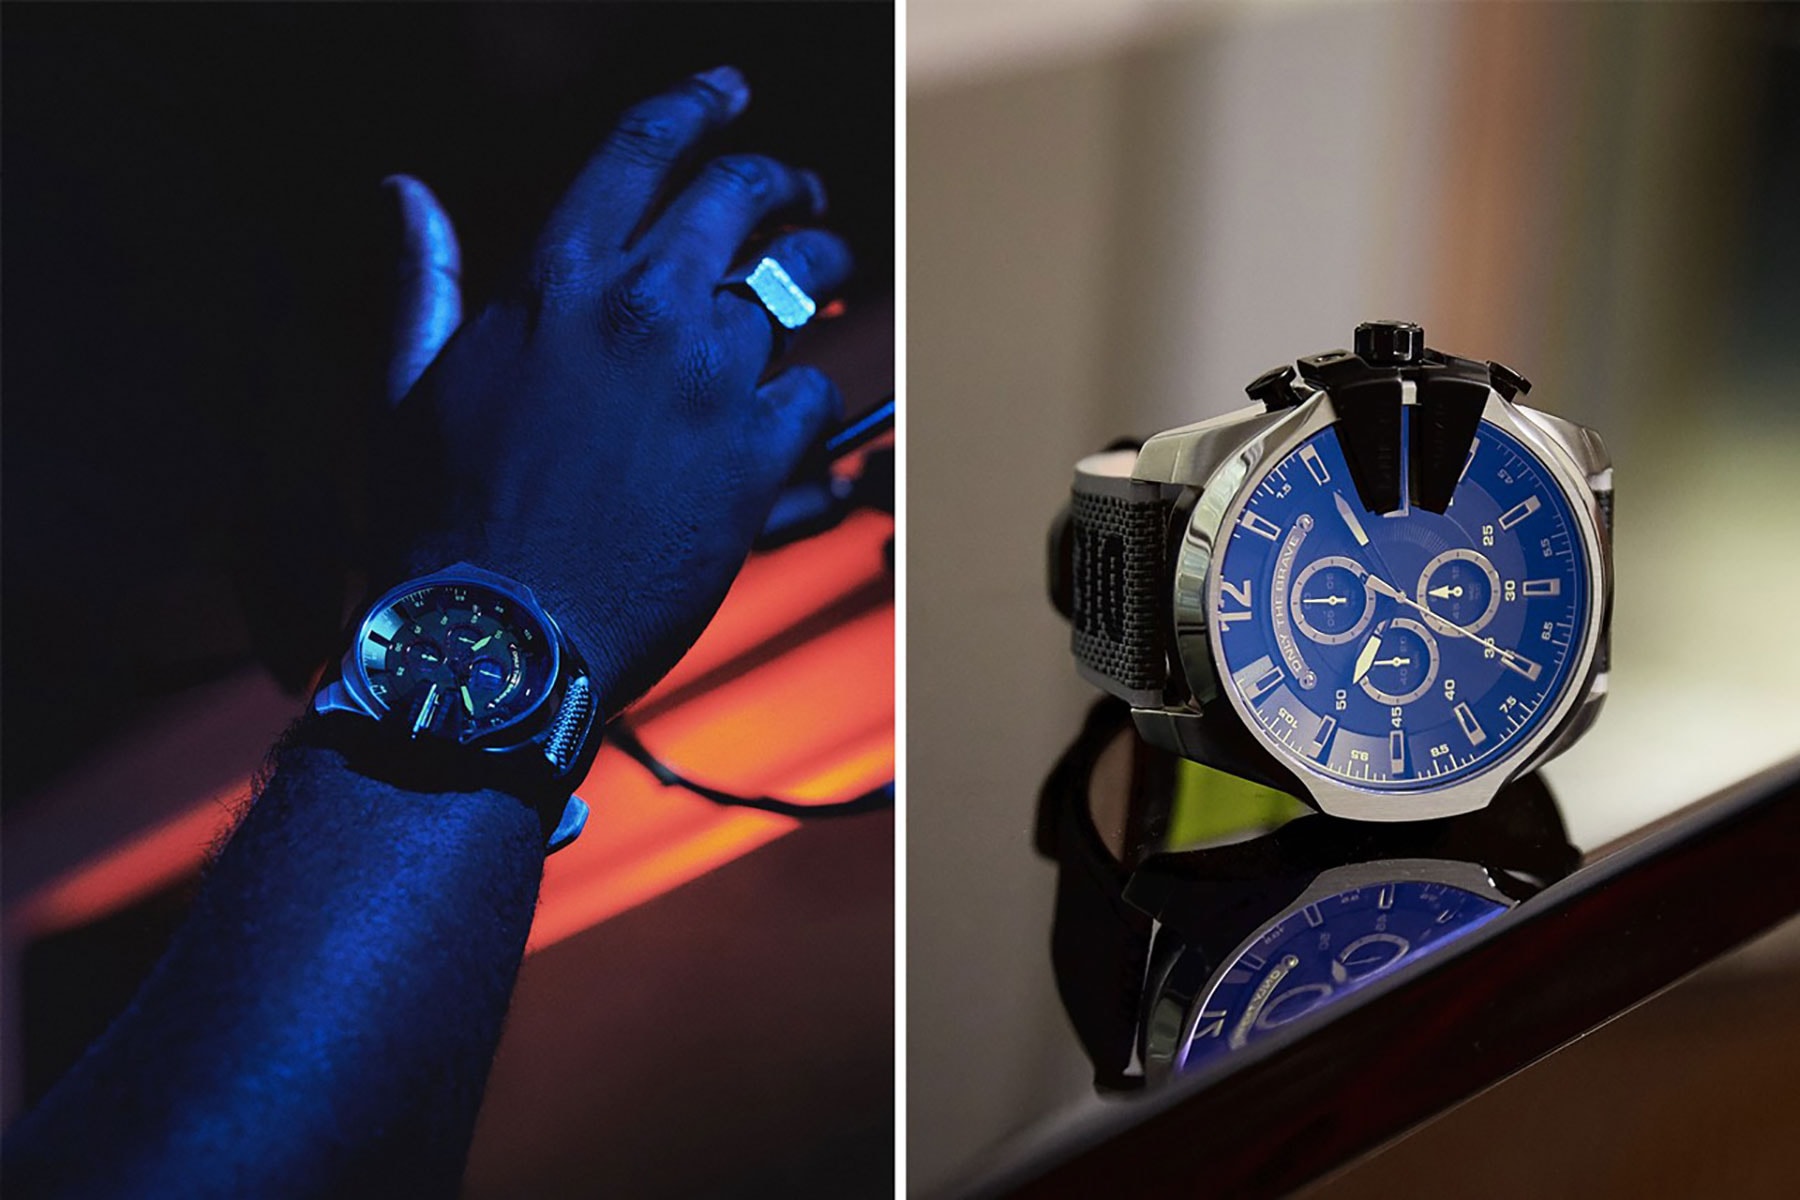 Diesel ディーゼル 時計 ラッパー ニューヨーク Diesel Taps '90s Rave Culture for Mega Chief Watch reflective black silver chronograph aurora anthony crystal les new york night 